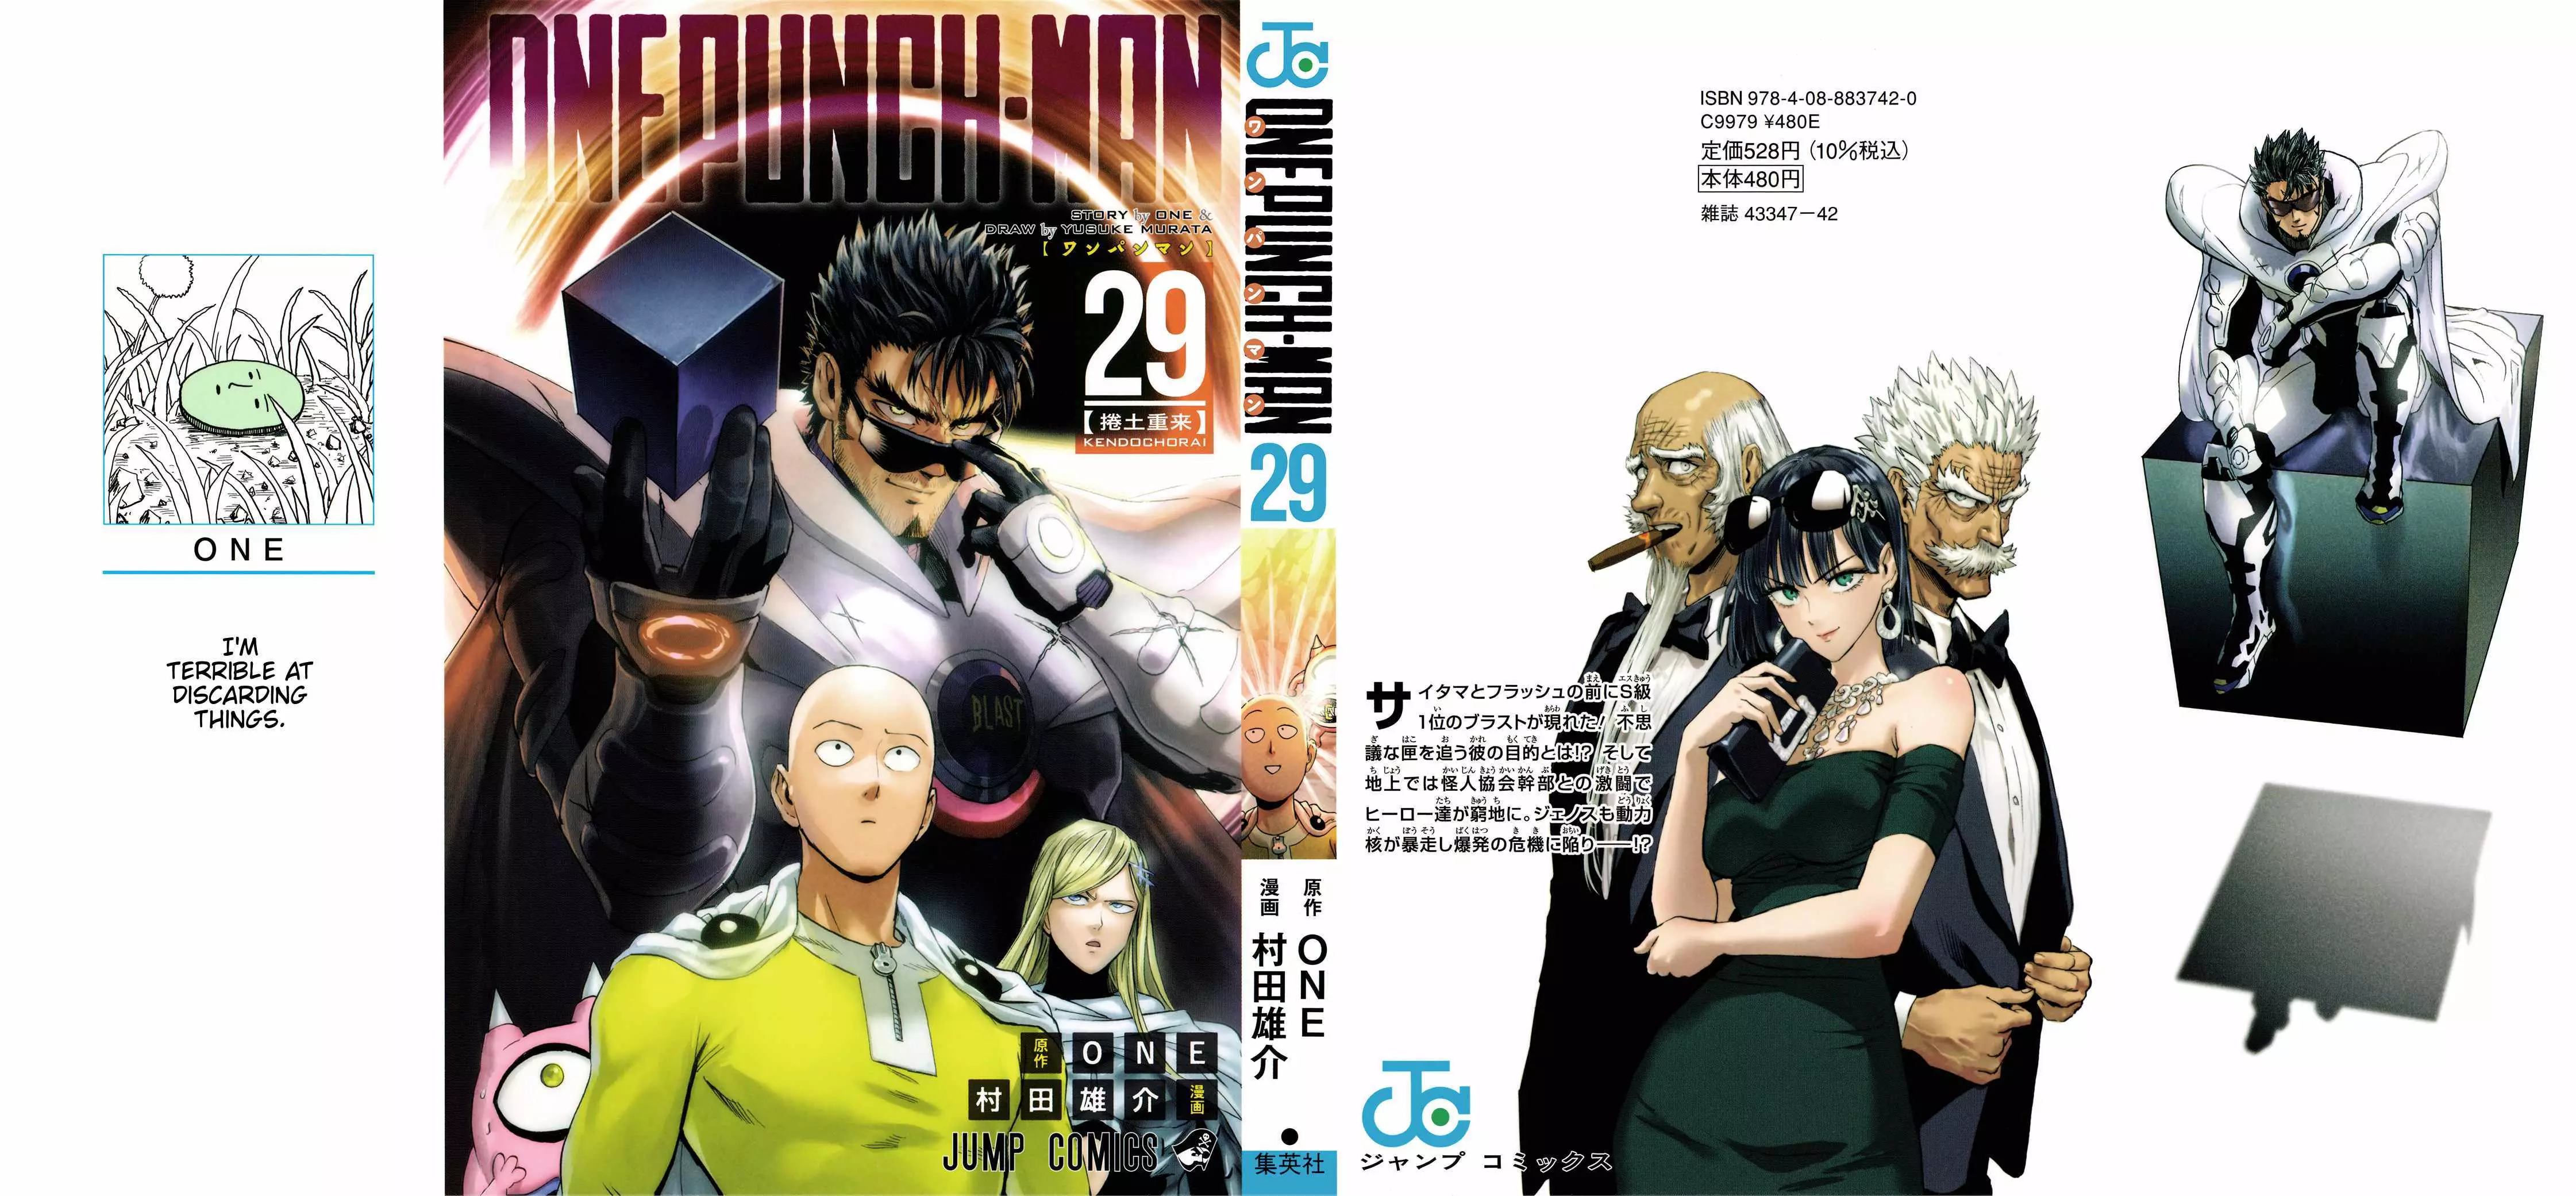 One Punch Man Chapter 195.1, READ One Punch Man Chapter 195.1 ONLINE, lost in the cloud genre,lost in the cloud gif,lost in the cloud girl,lost in the cloud goods,lost in the cloud goodreads,lost in the cloud,lost ark cloud gaming,lost odyssey cloud gaming,lost in the cloud fanart,lost in the cloud fanfic,lost in the cloud fandom,lost in the cloud first kiss,lost in the cloud font,lost in the cloud ending,lost in the cloud episode 97,lost in the cloud edit,lost in the cloud explained,lost in the cloud dog,lost in the cloud discord server,lost in the cloud desktop wallpaper,lost in the cloud drawing,can't find my cloud on network,lost in the cloud characters,lost in the cloud chapter 93 release date,lost in the cloud birthday,lost in the cloud birthday art,lost in the cloud background,lost in the cloud banner,lost in the clouds meaning,what is the black cloud in lost,lost in the cloud ao3,lost in the cloud anime,lost in the cloud art,lost in the cloud author twitter,lost in the cloud author instagram,lost in the cloud artist,lost in the cloud acrylic stand,lost in the cloud artist twitter,lost in the cloud art style,lost in the cloud analysis